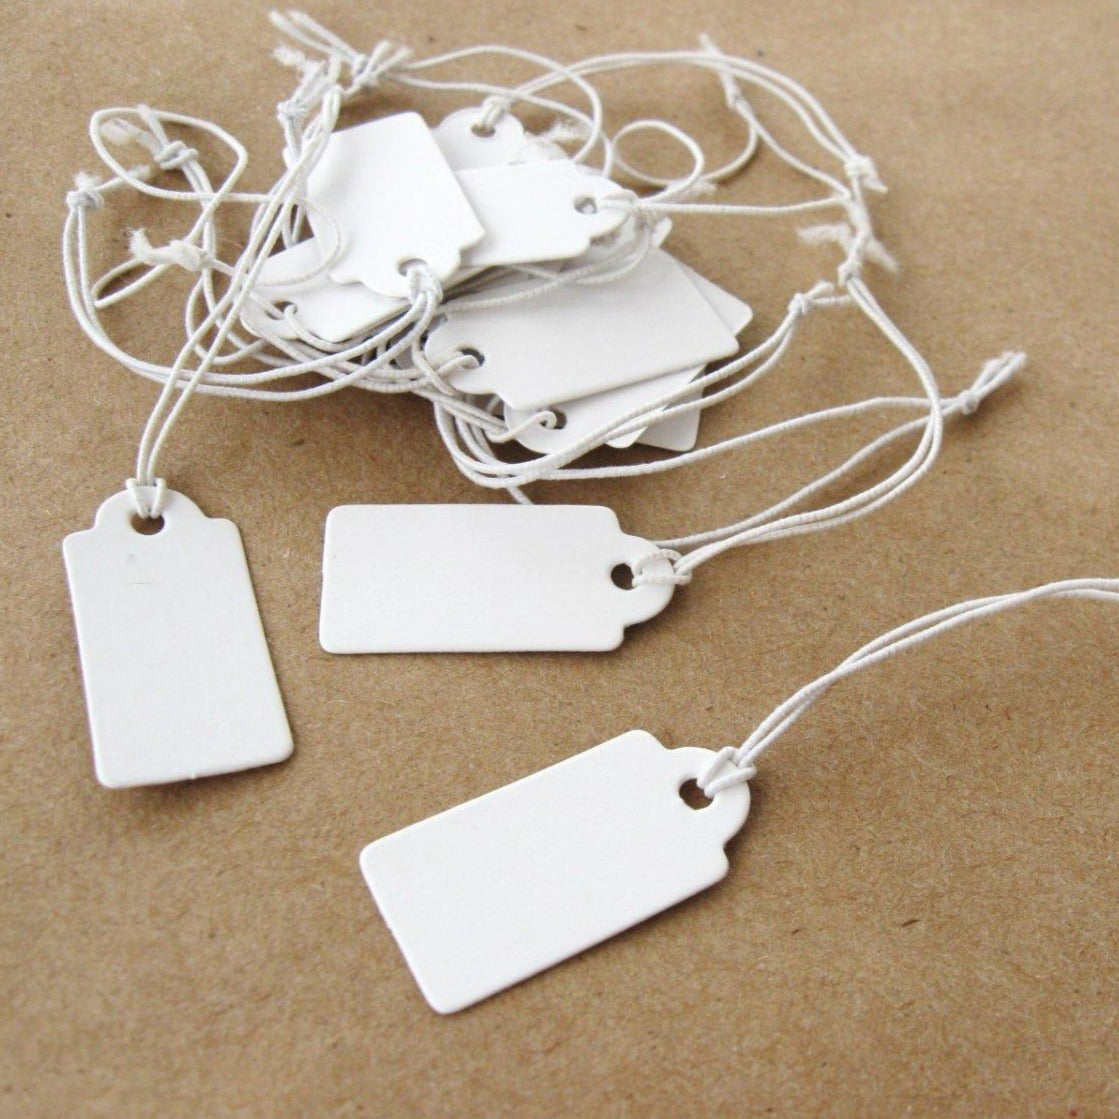 Jewelry price tags - Blank white rectangular tags - Set of 50